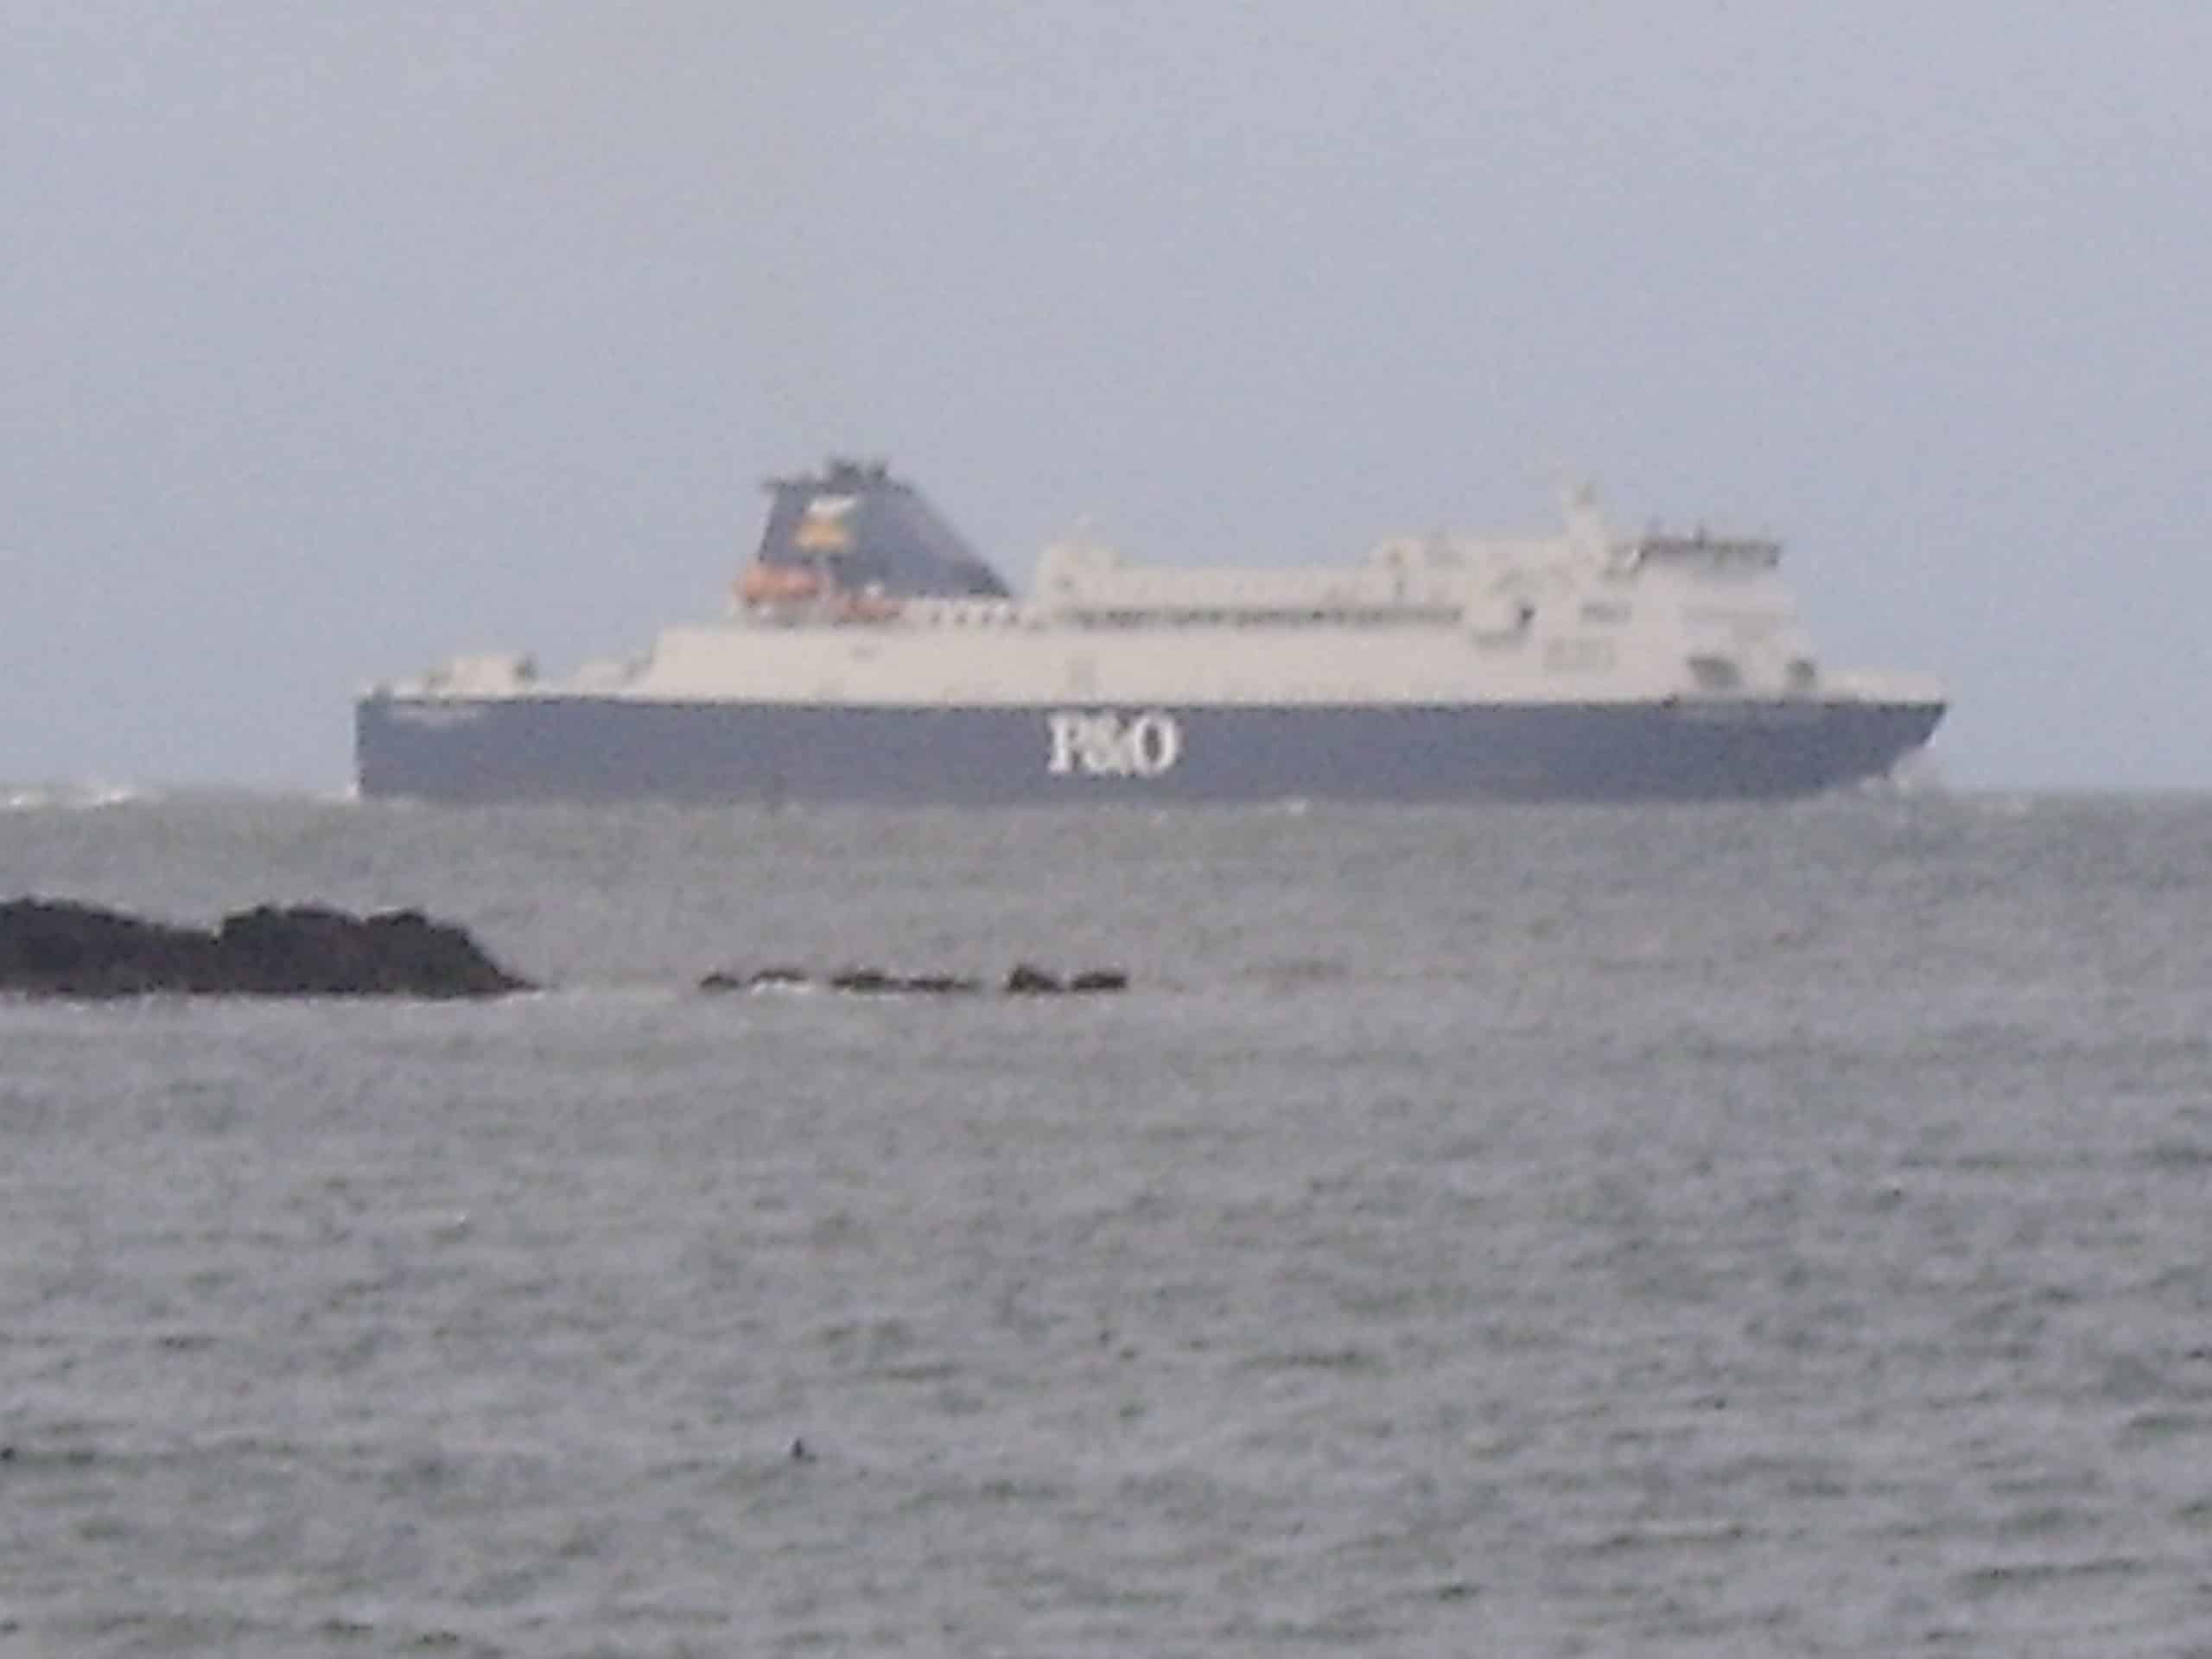 P&O ferry adrift in the Irish Sea with lifeboat search underway